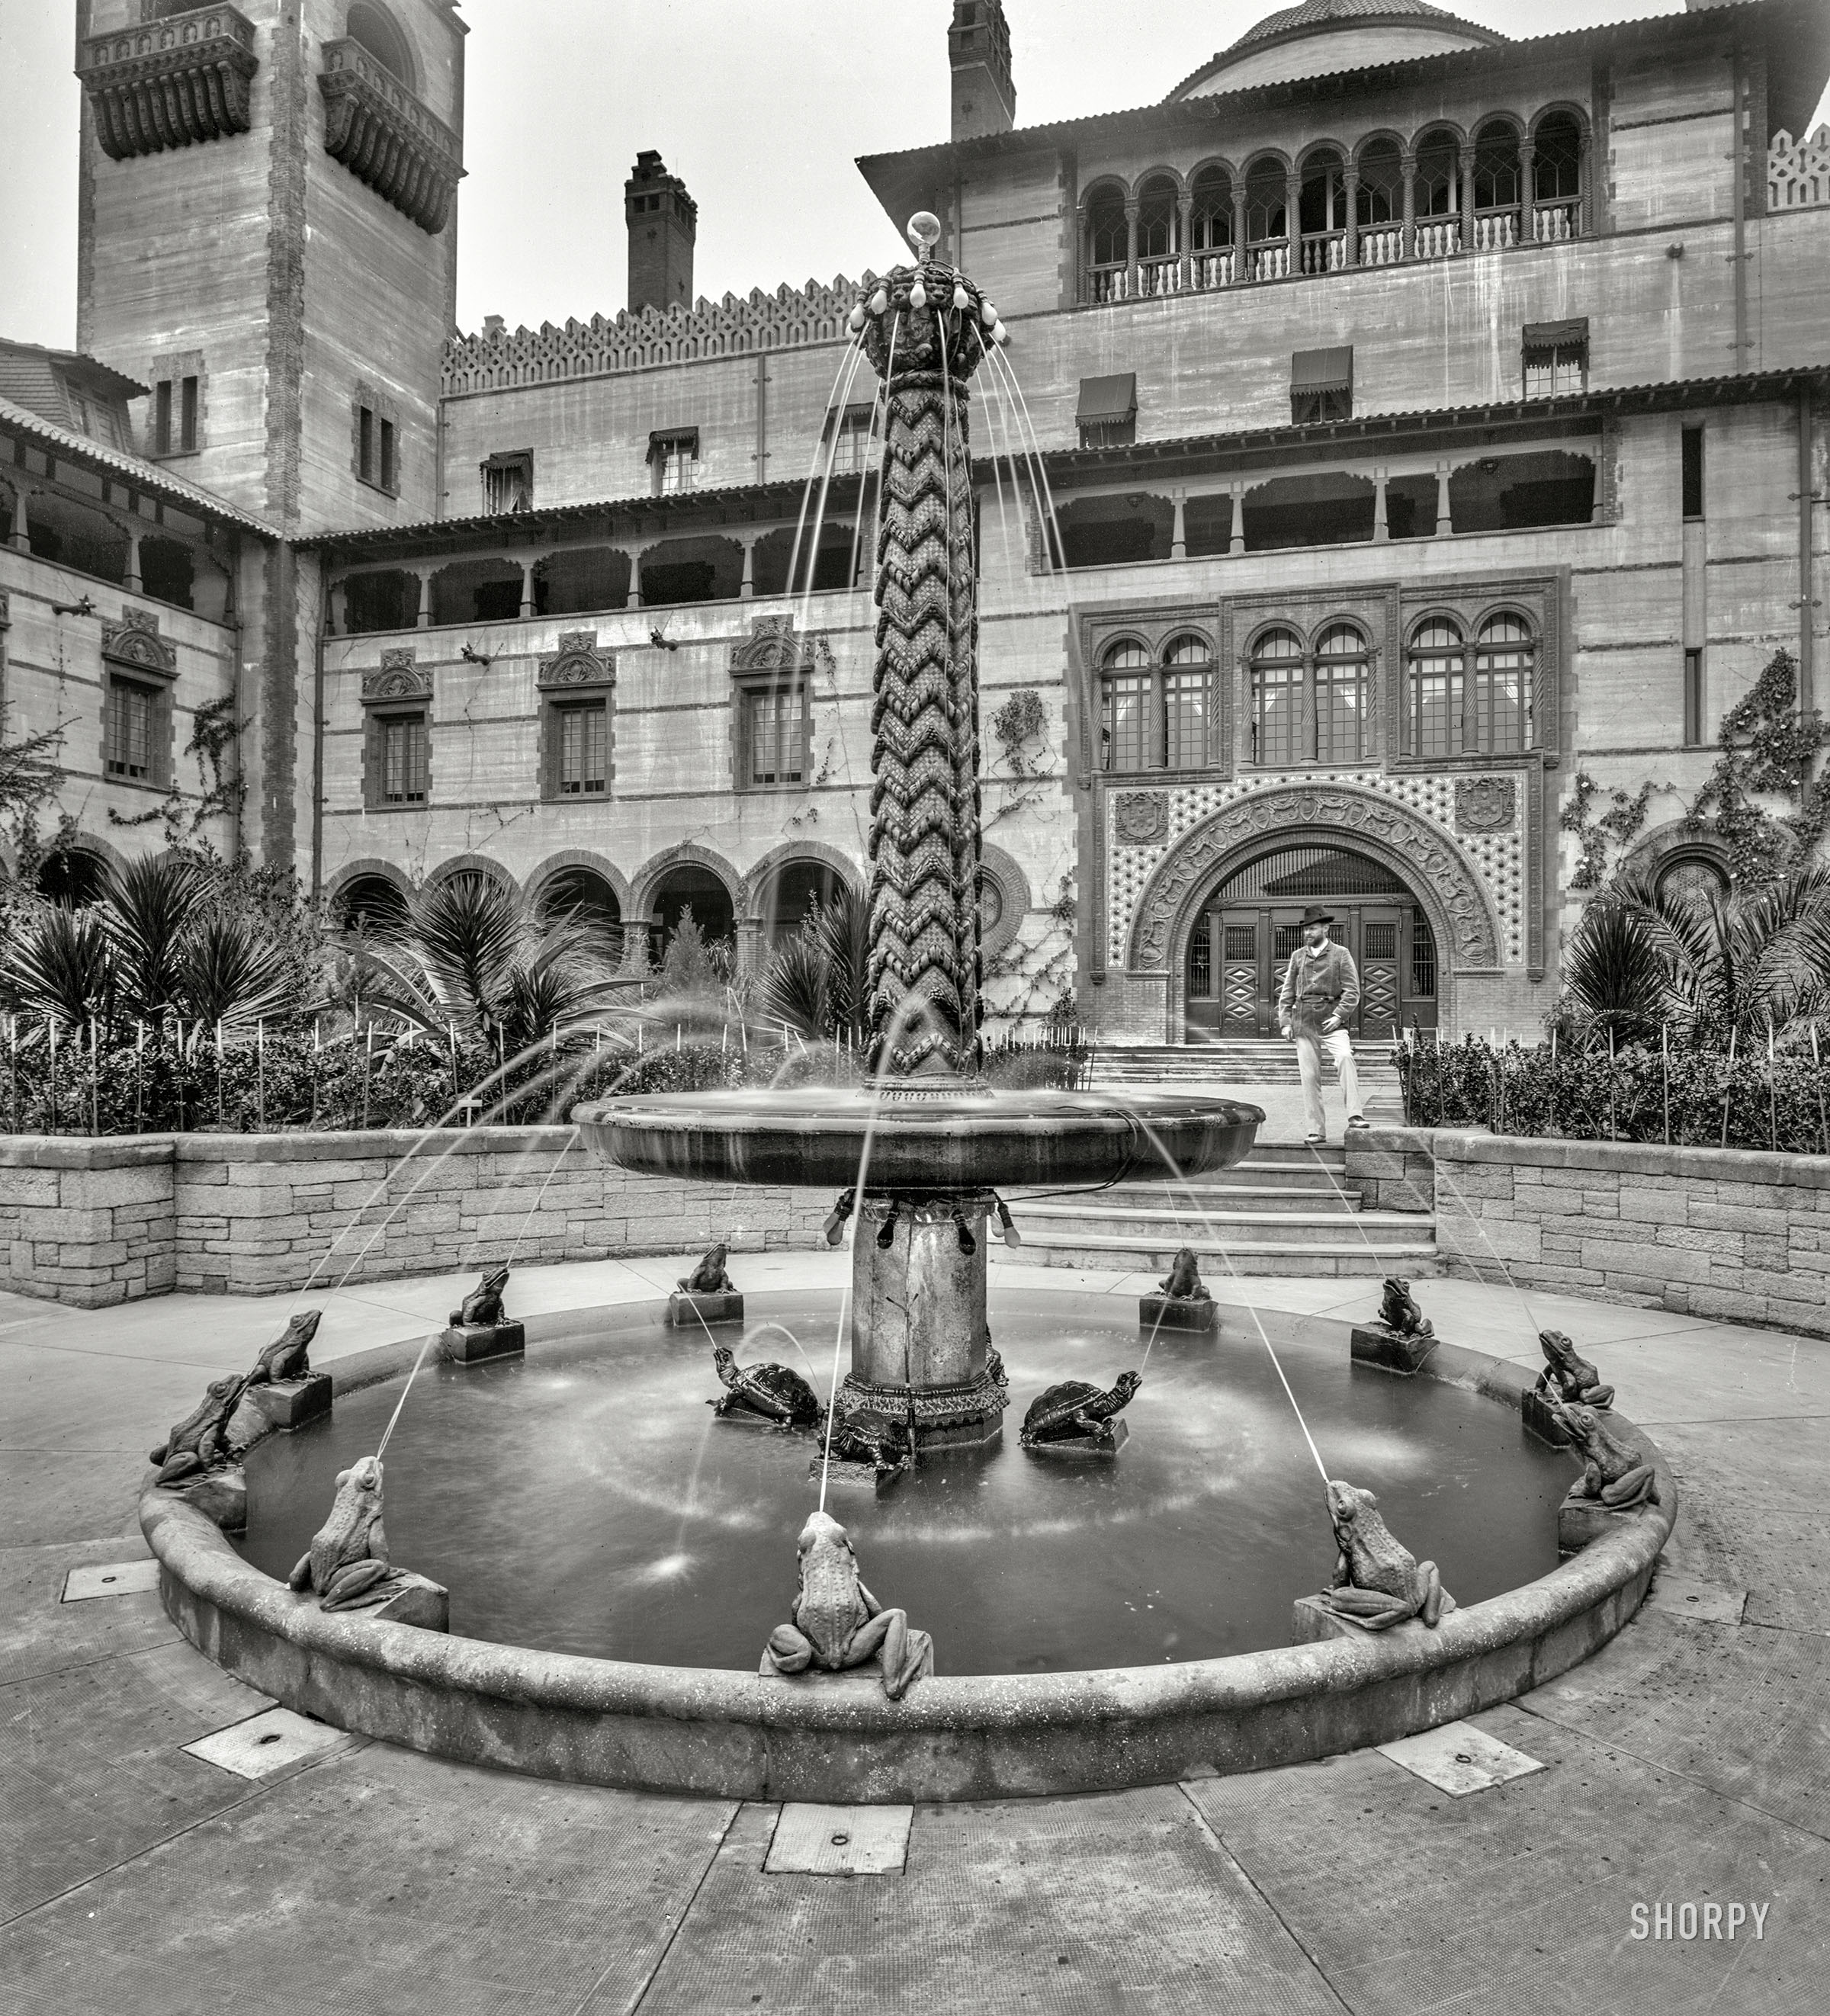 St. Augustine, Florida, circa 1897. "Fountain at Ponce de Leon Hotel." A phantasmagoria of Edison bulbs and expectorating amphibians. 8x10 inch dry plate glass negative by William Henry Jackson. View full size.